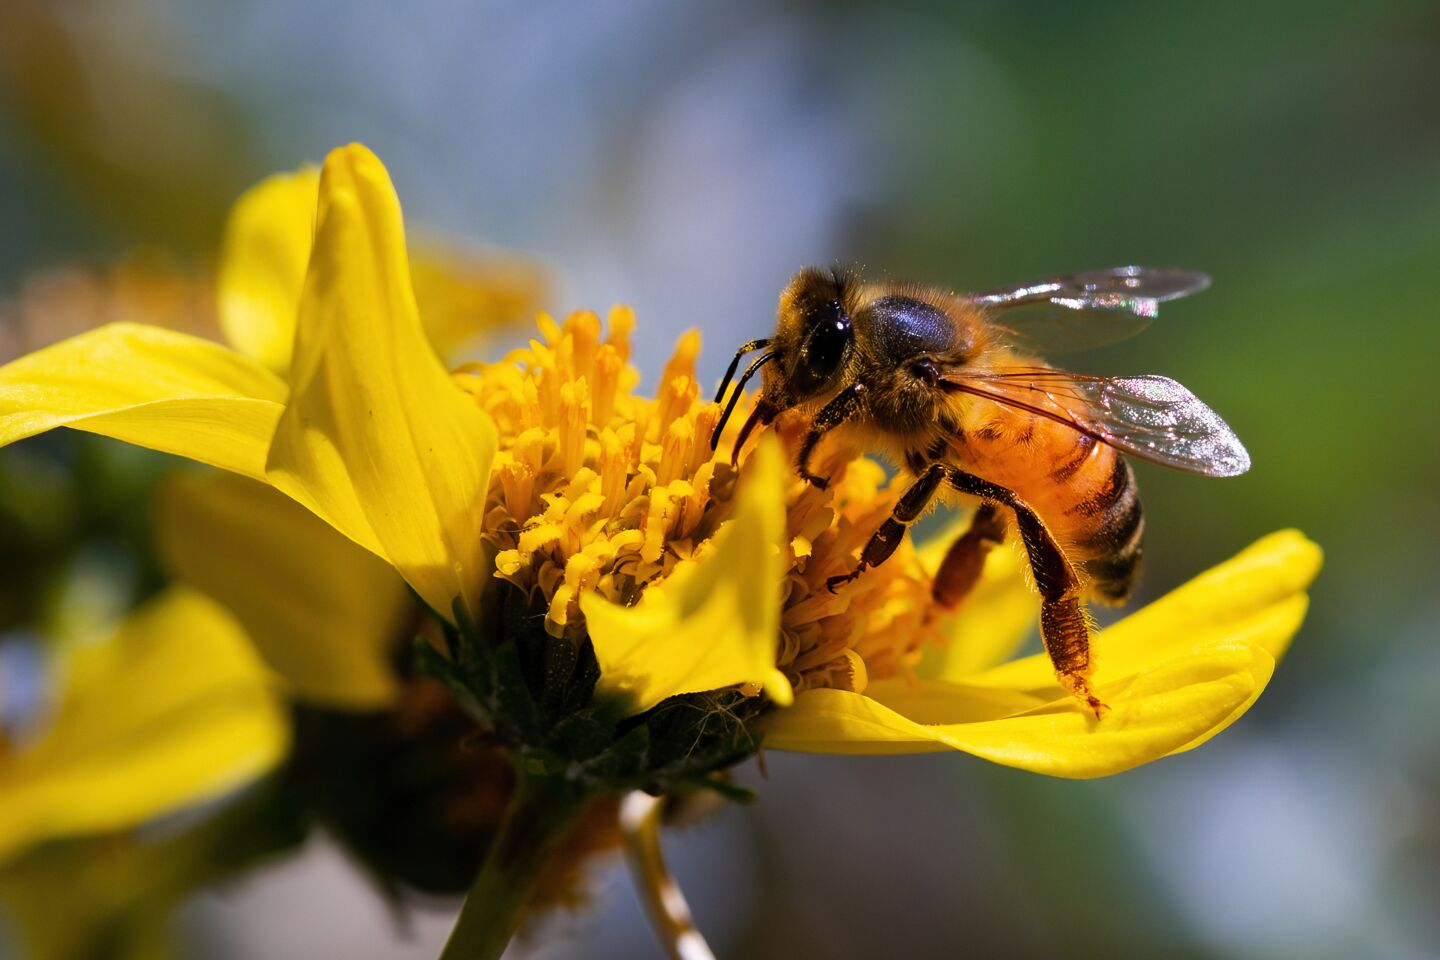 A bee feeds on the nectar and pollen from a brittlebush at Anza-Borrego Desert State Park.